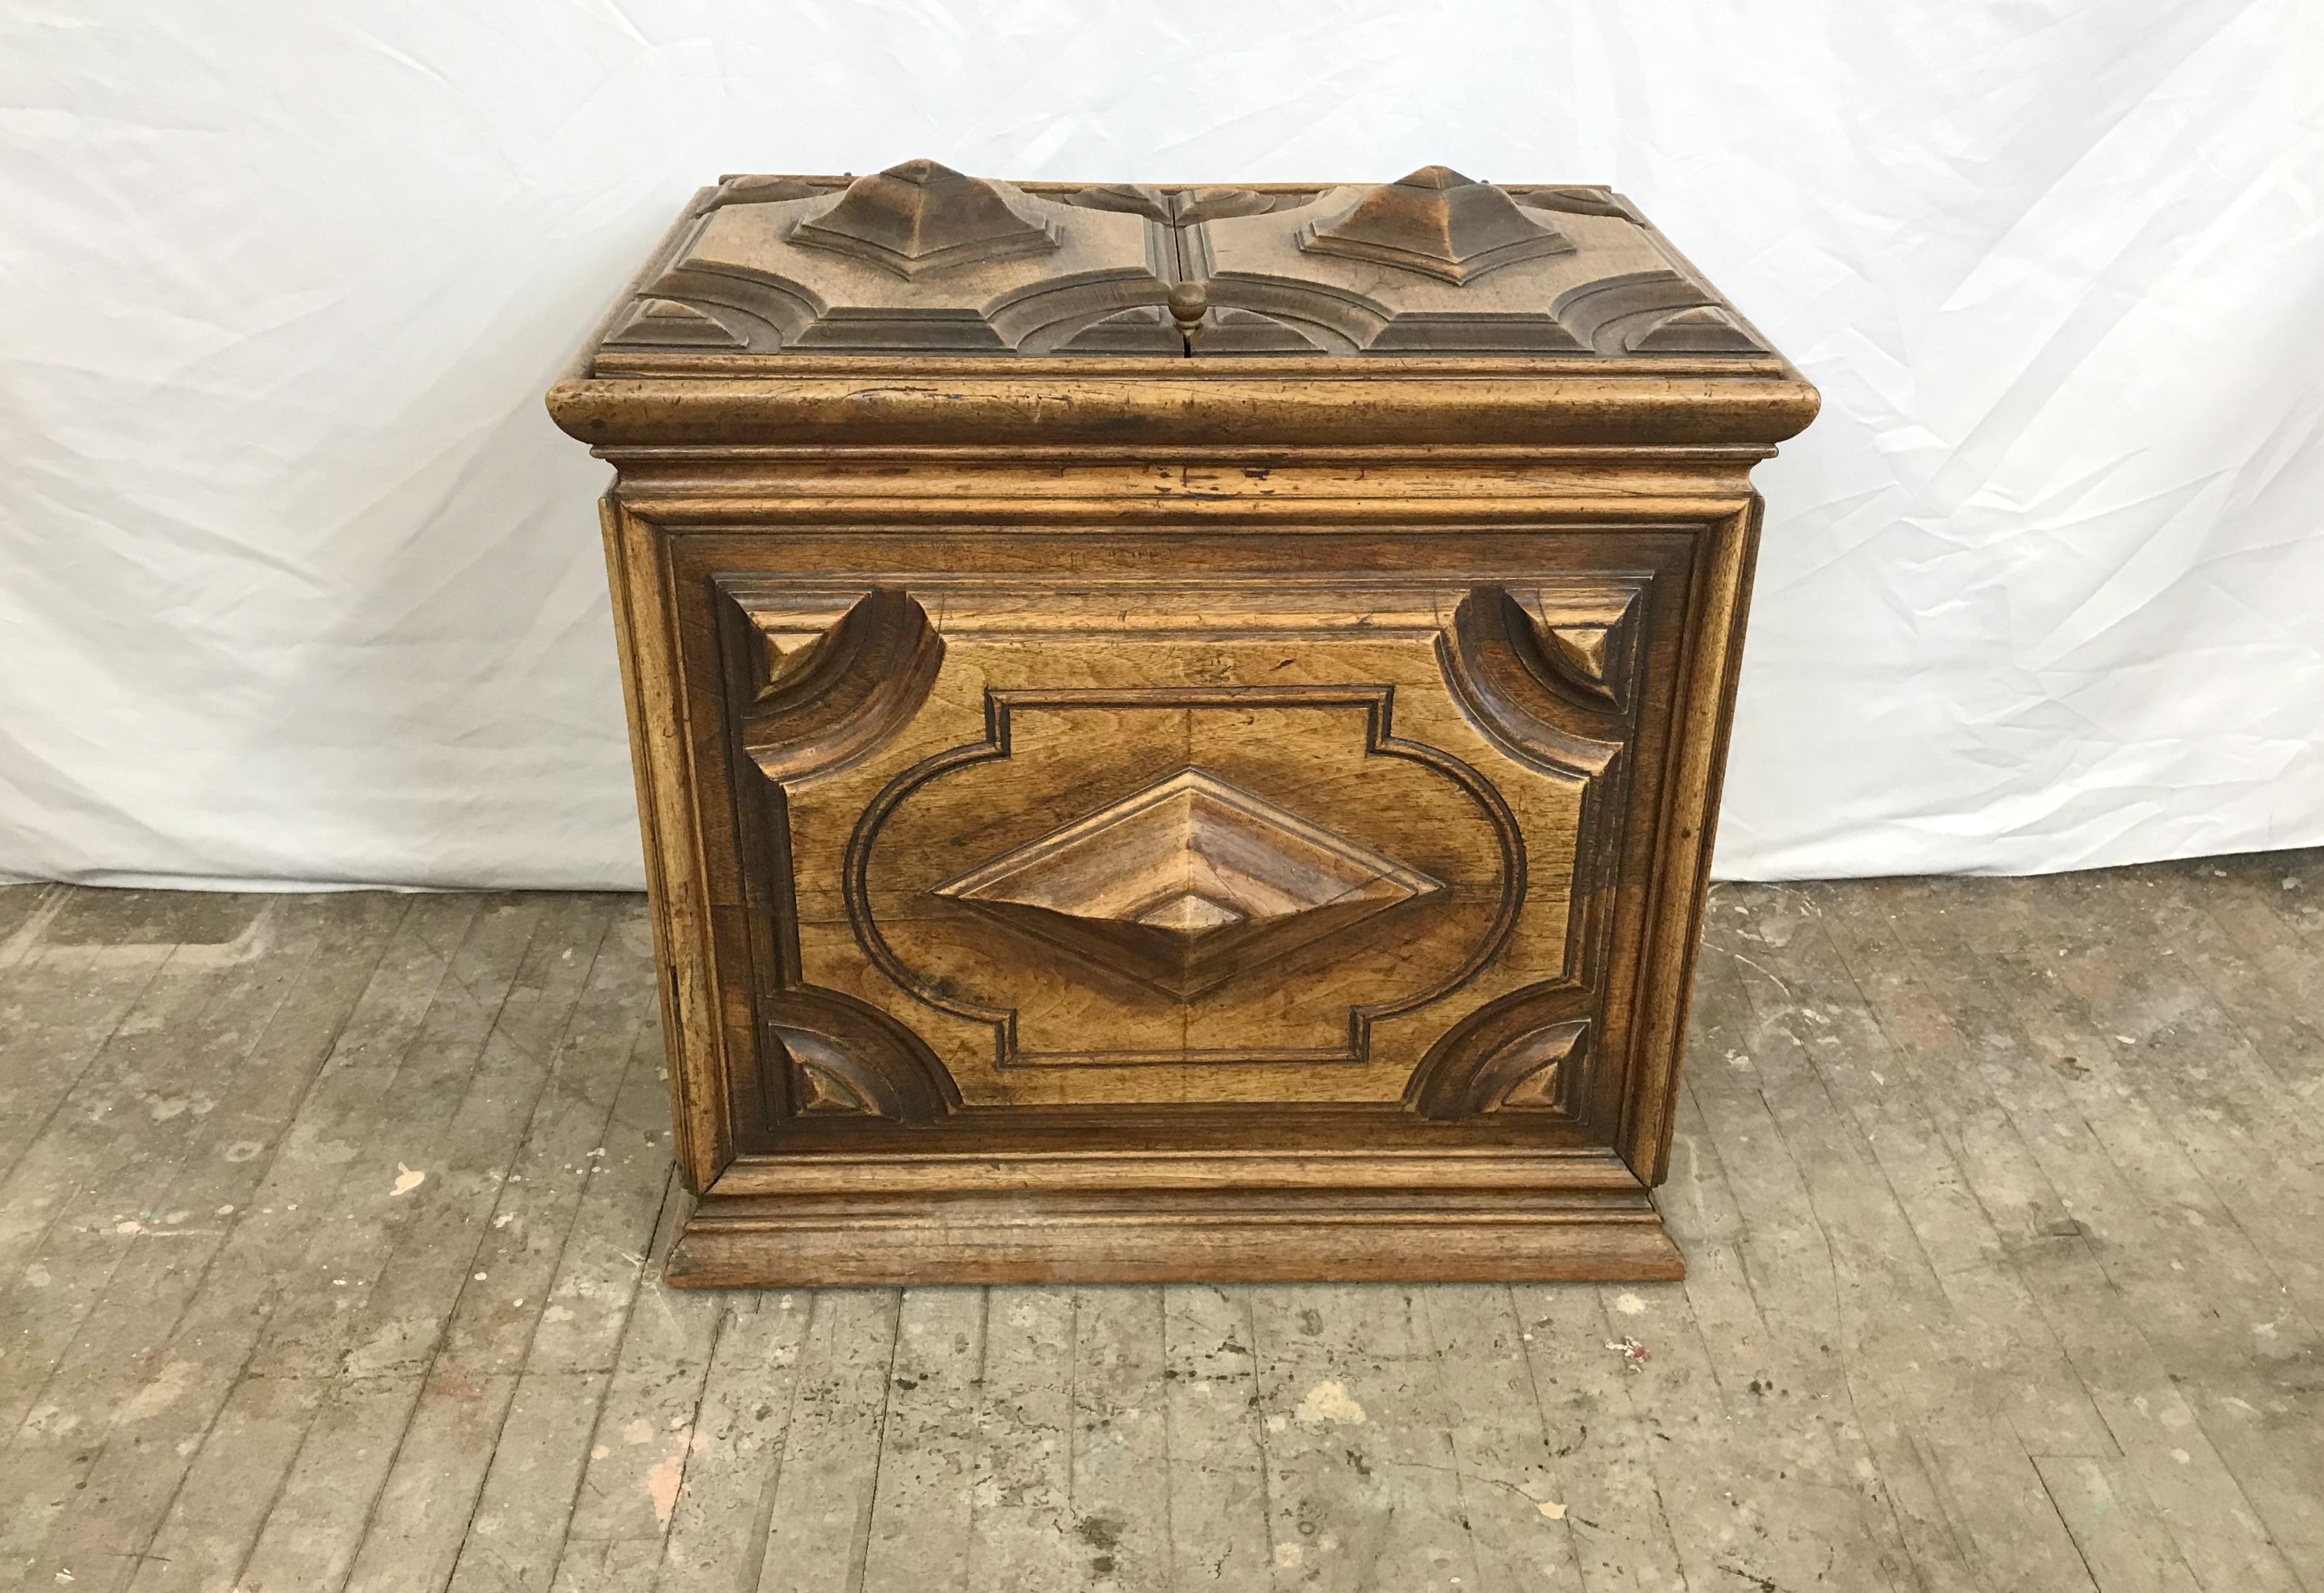 An extraordinary French storage box, made of walnut, dating to the 1700s. It's accessed from above via a hinged top with hand forged iron work. It's decorated with carved geometric raised panels. It's a great piece and came from the estate of